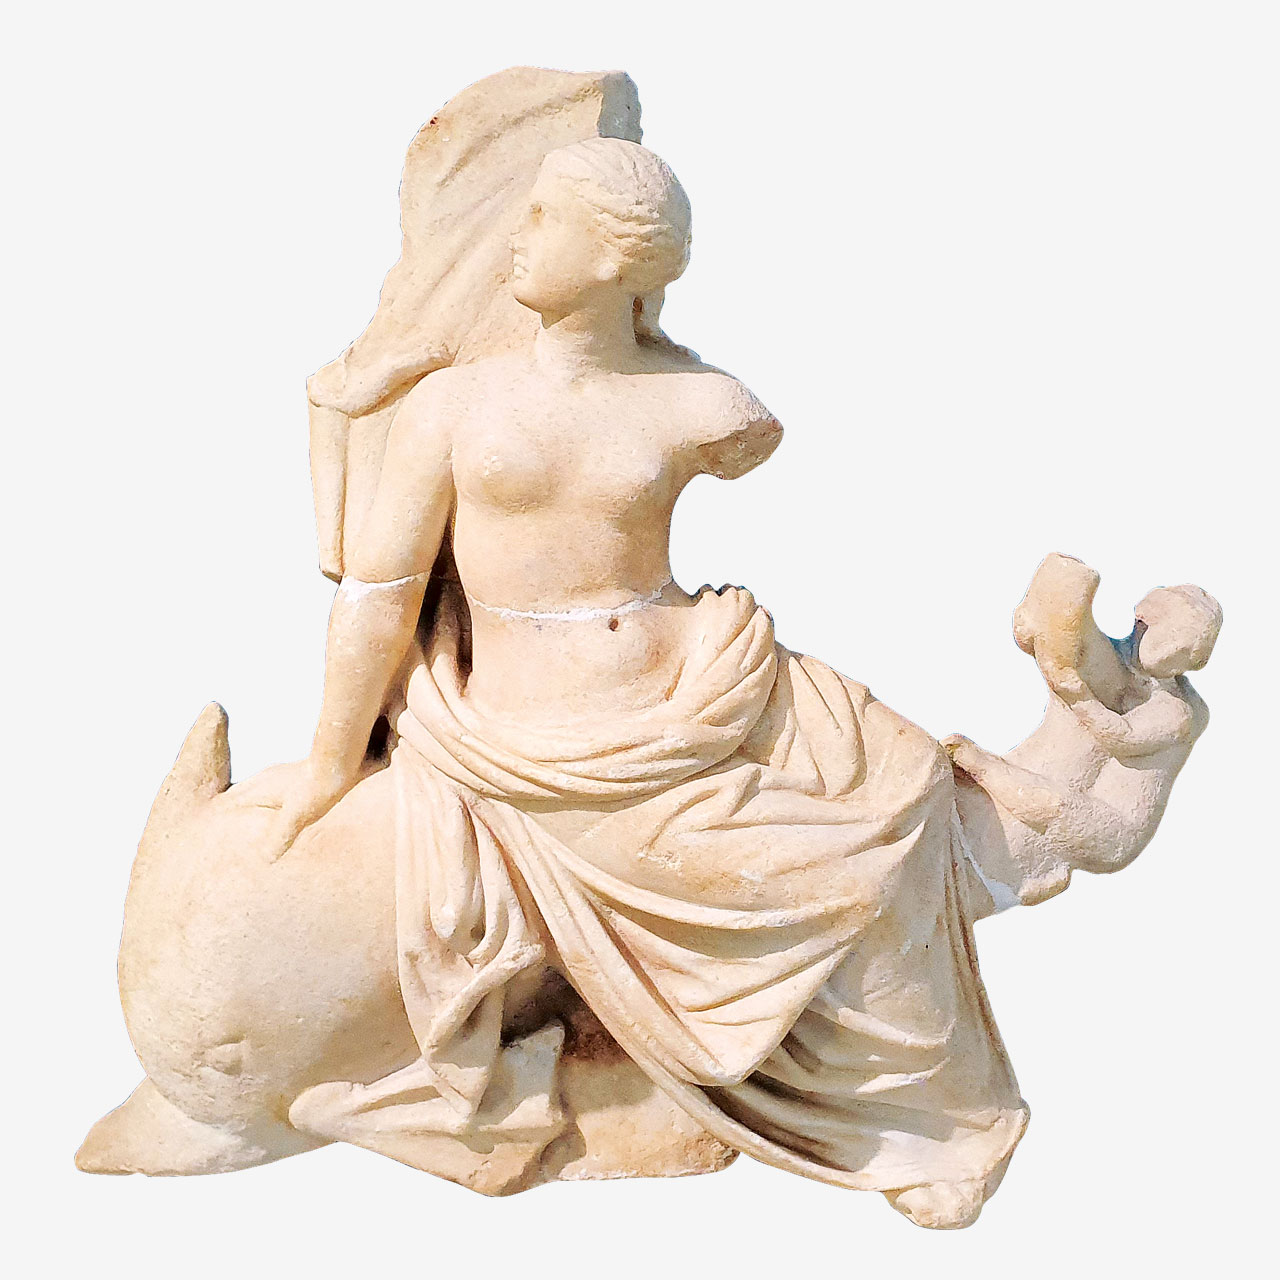 Marble statuette of Aphrodite riding a dolphin.